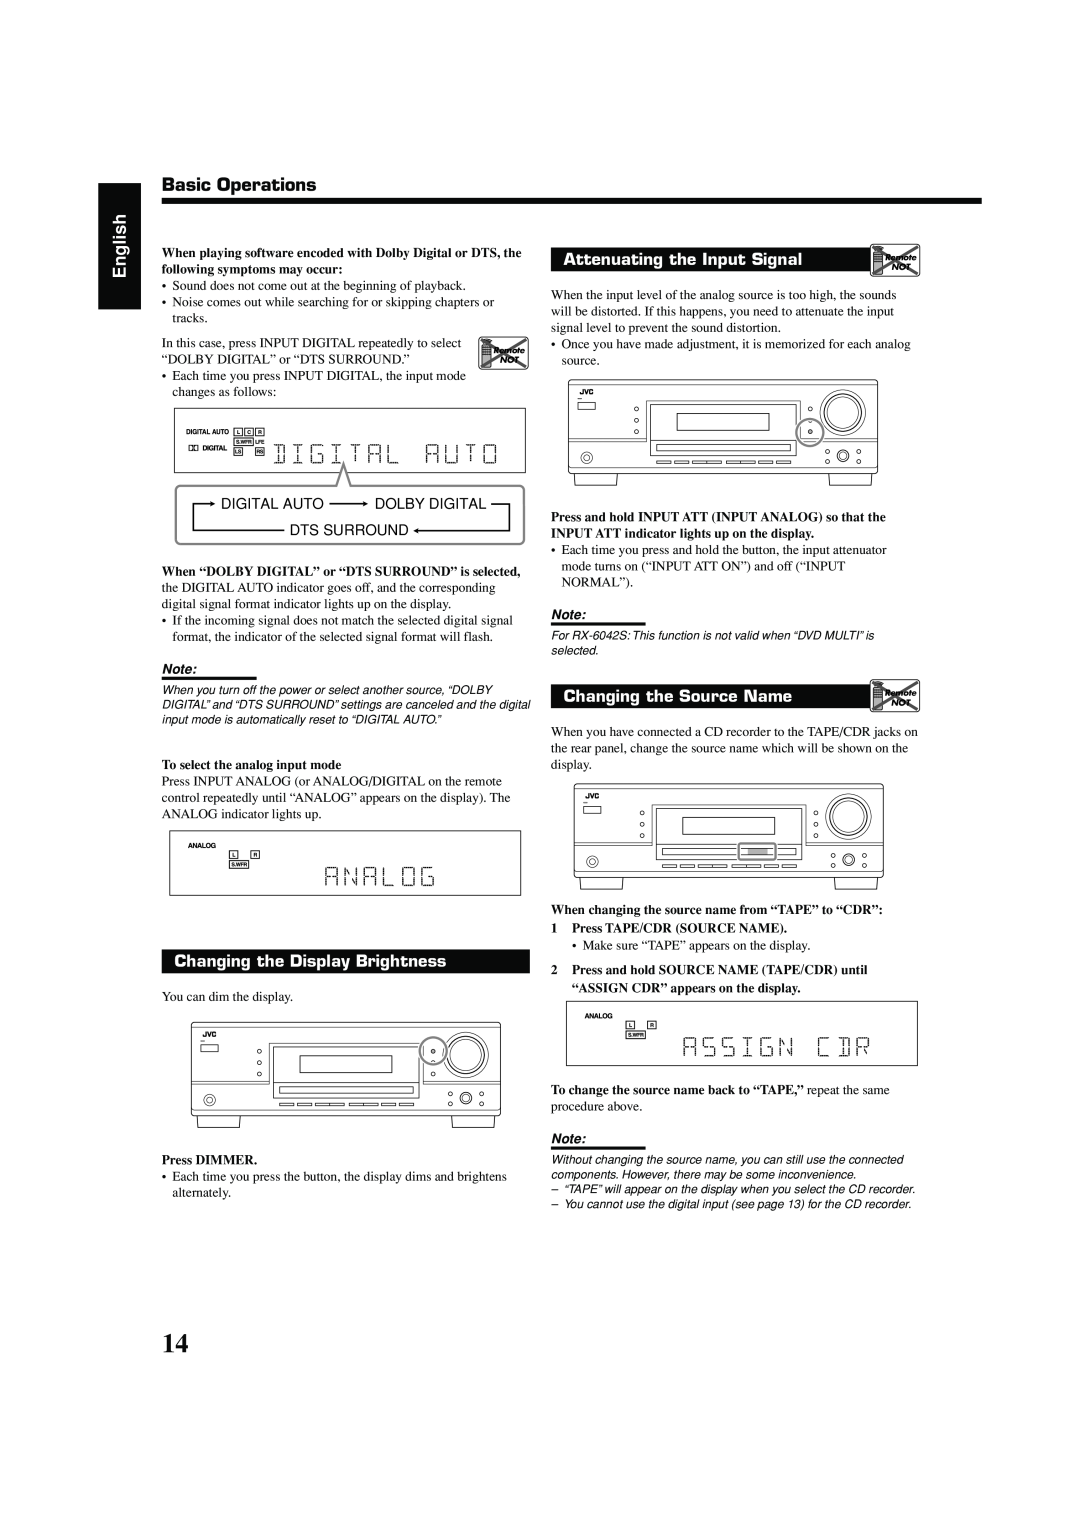 JVC LVT1140-004A Basic Operations, English, Attenuating the Input Signal, Changing the Display Brightness, Press DIMMER 